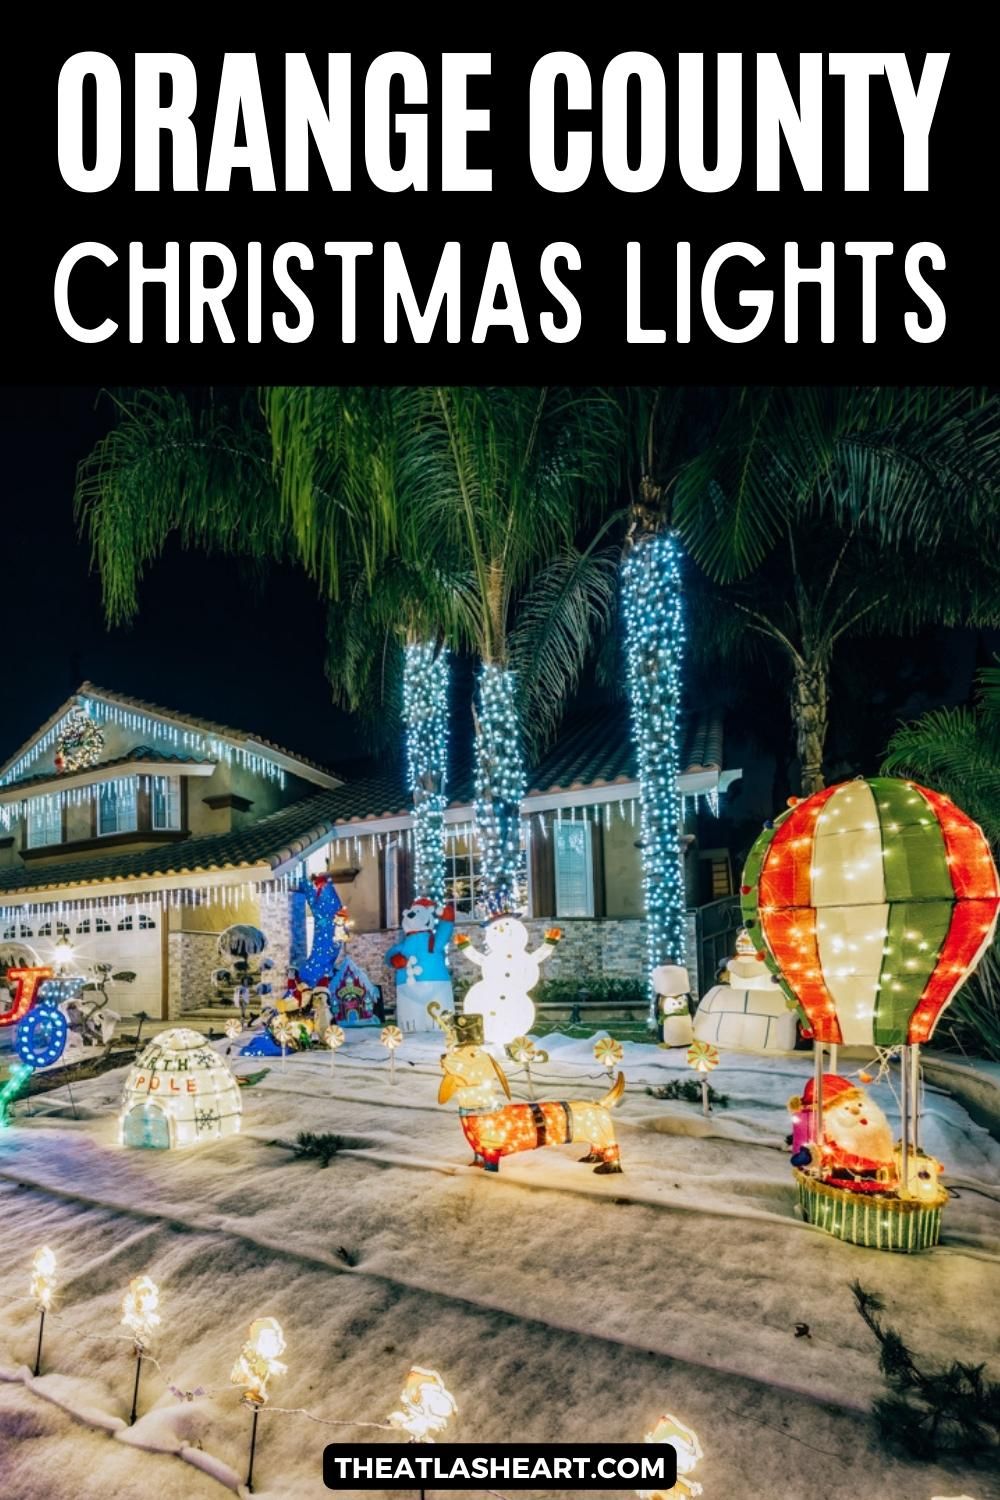 Best Christmas Lights in Orange County Pin
A picture of the Brea Christmas house with brightly lit characters like a snowman and a Santa dog dressed in a top hat, with palm trees lined in lights and the text overlay, "Orange County Christmas Lights."